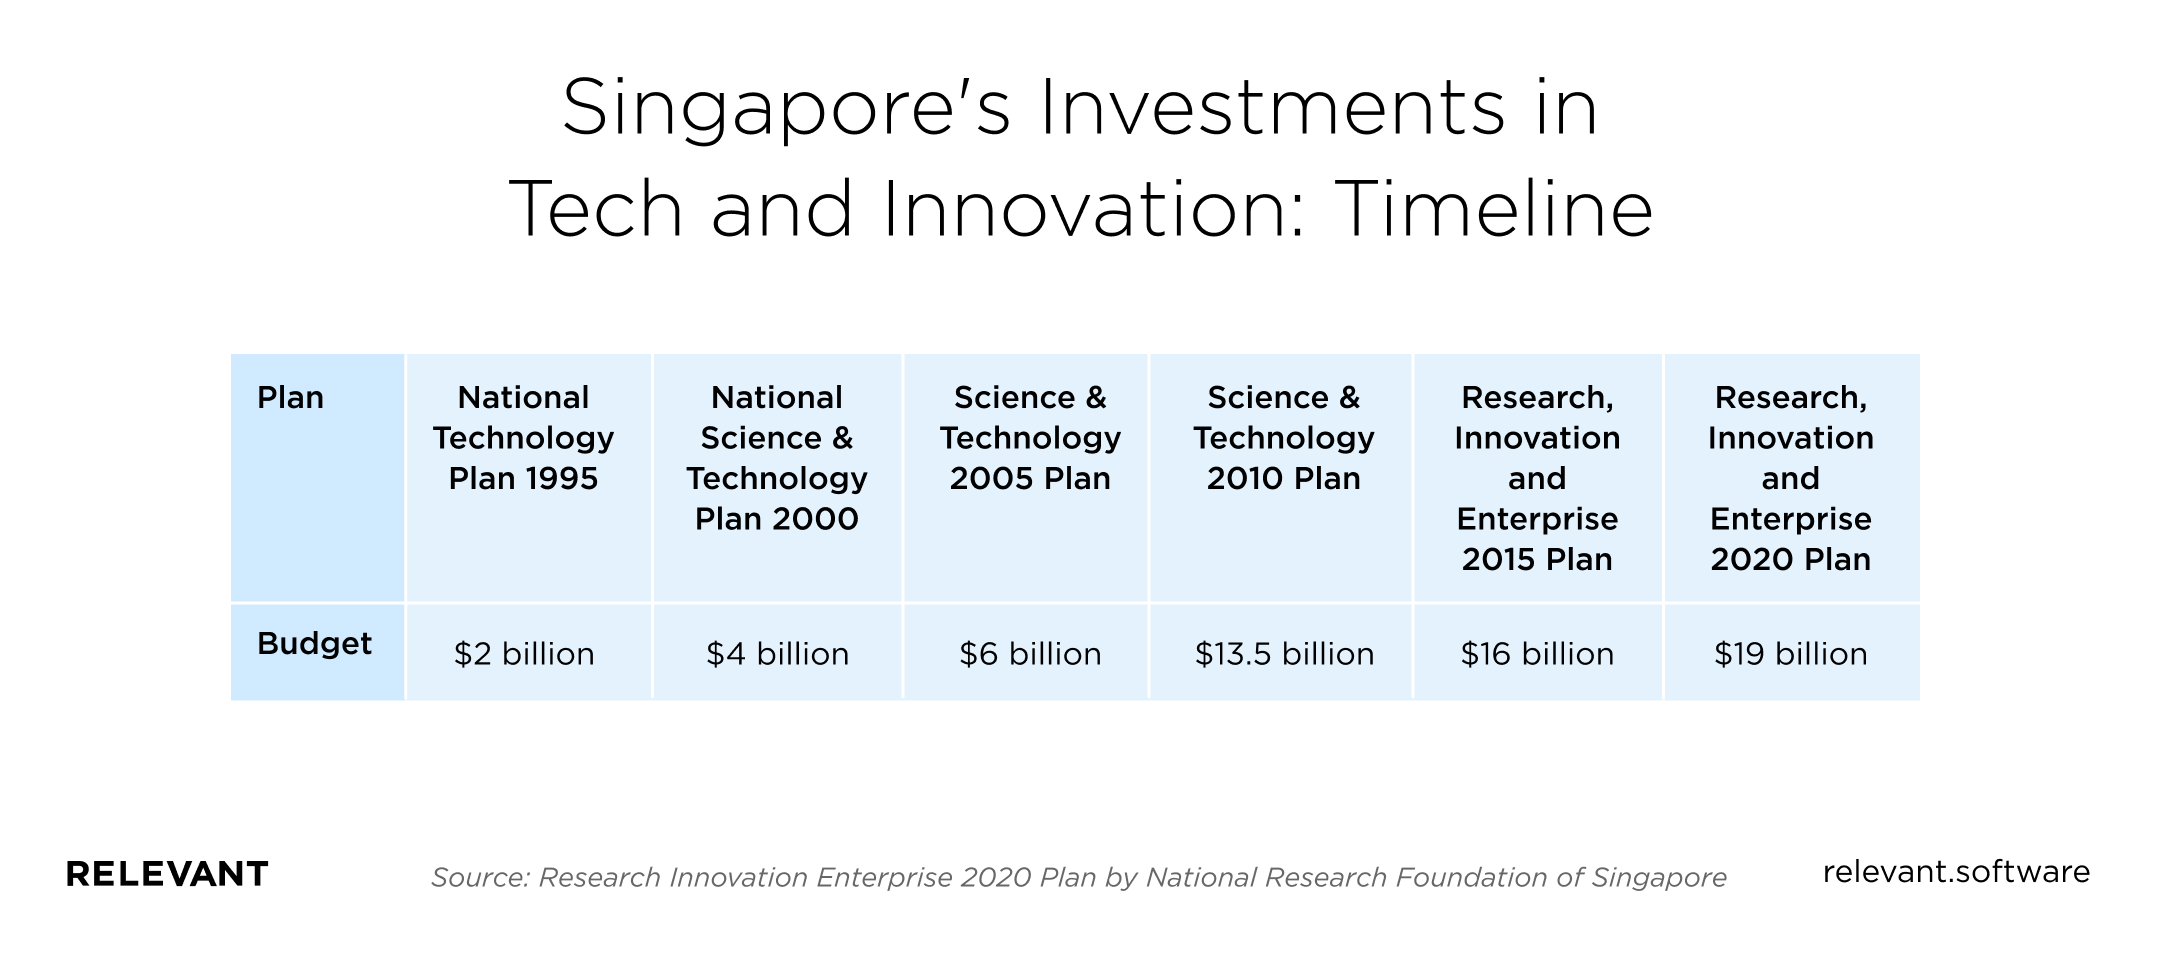 Singapore's Investments in Tech and Innovation: Timeline